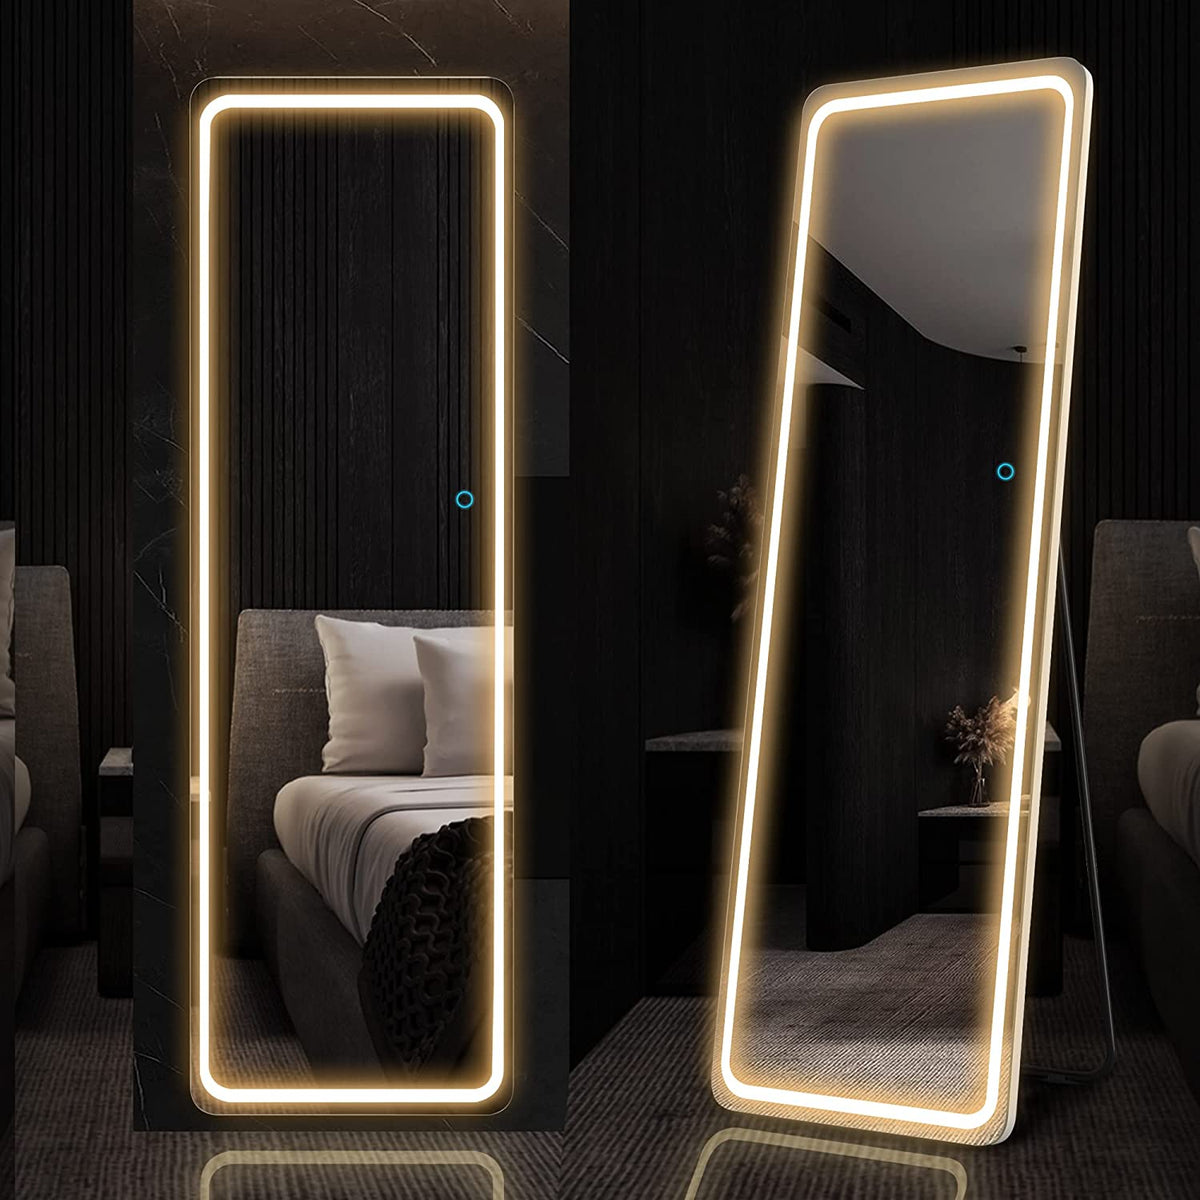 SmileSellers Glass 3D Beautiful Modern Designed LED Glass Mirror With White light +Warm Light+ Cool Day Light + DimmerLED Mirror (18x48)